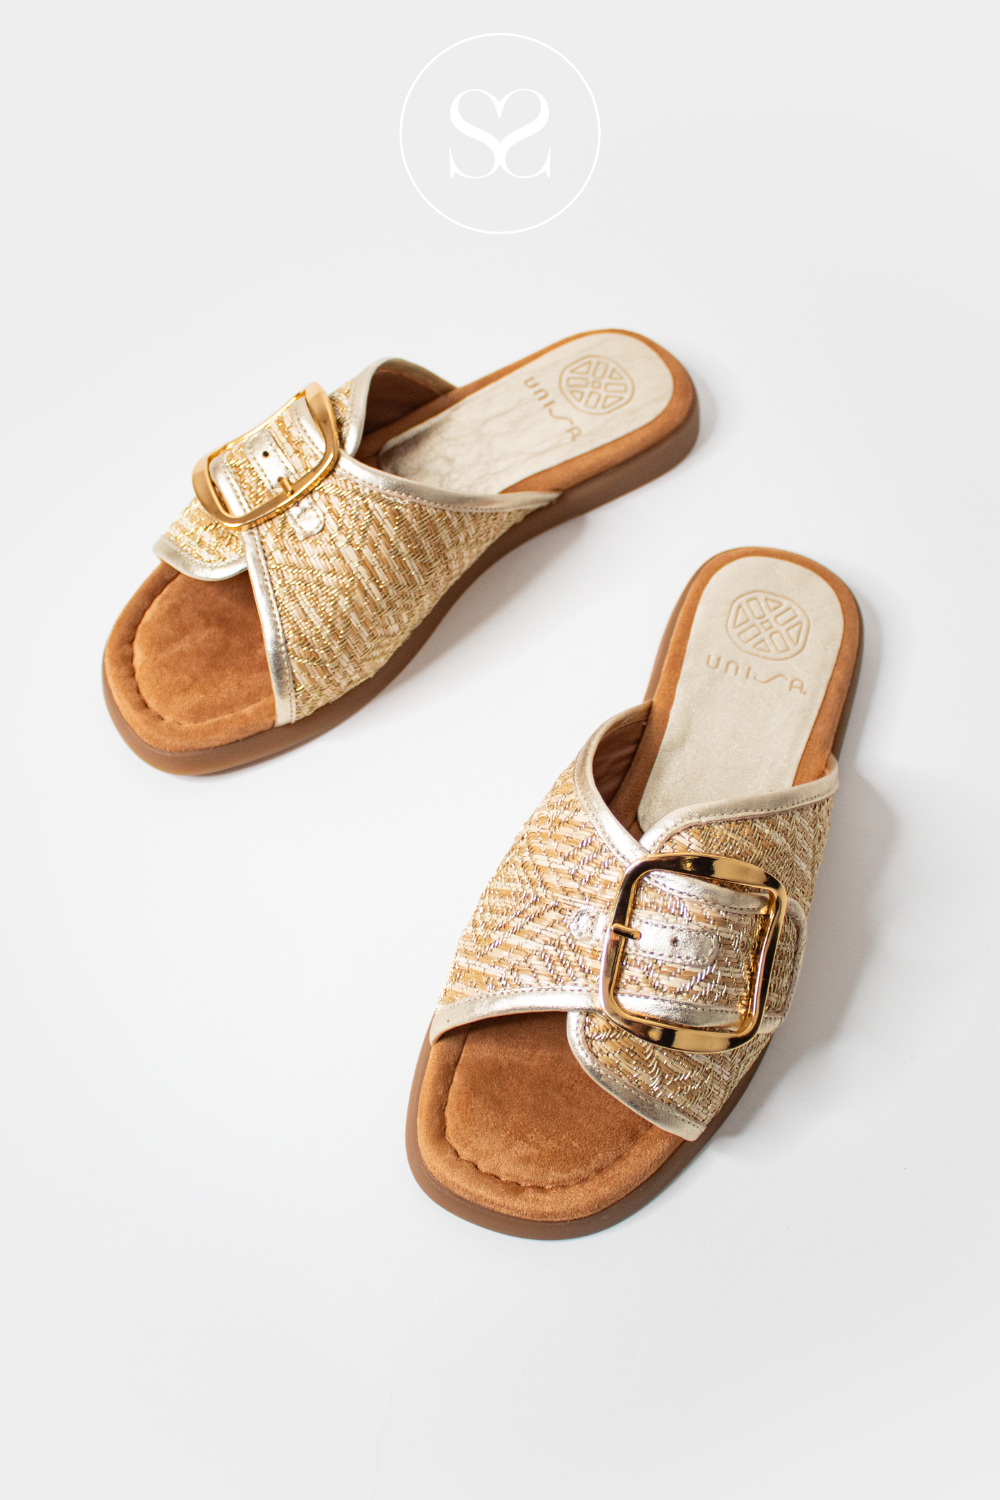 UNISA CRAY GOLD WOVEN FABRIC SLIDERS WITH GOLD STATEMENT BUCKLE DETAILUNISA CRAY GOLD WOVEN FABRIC SLIDERS WITH GOLD STATEMENT BUCKLE DETAIL